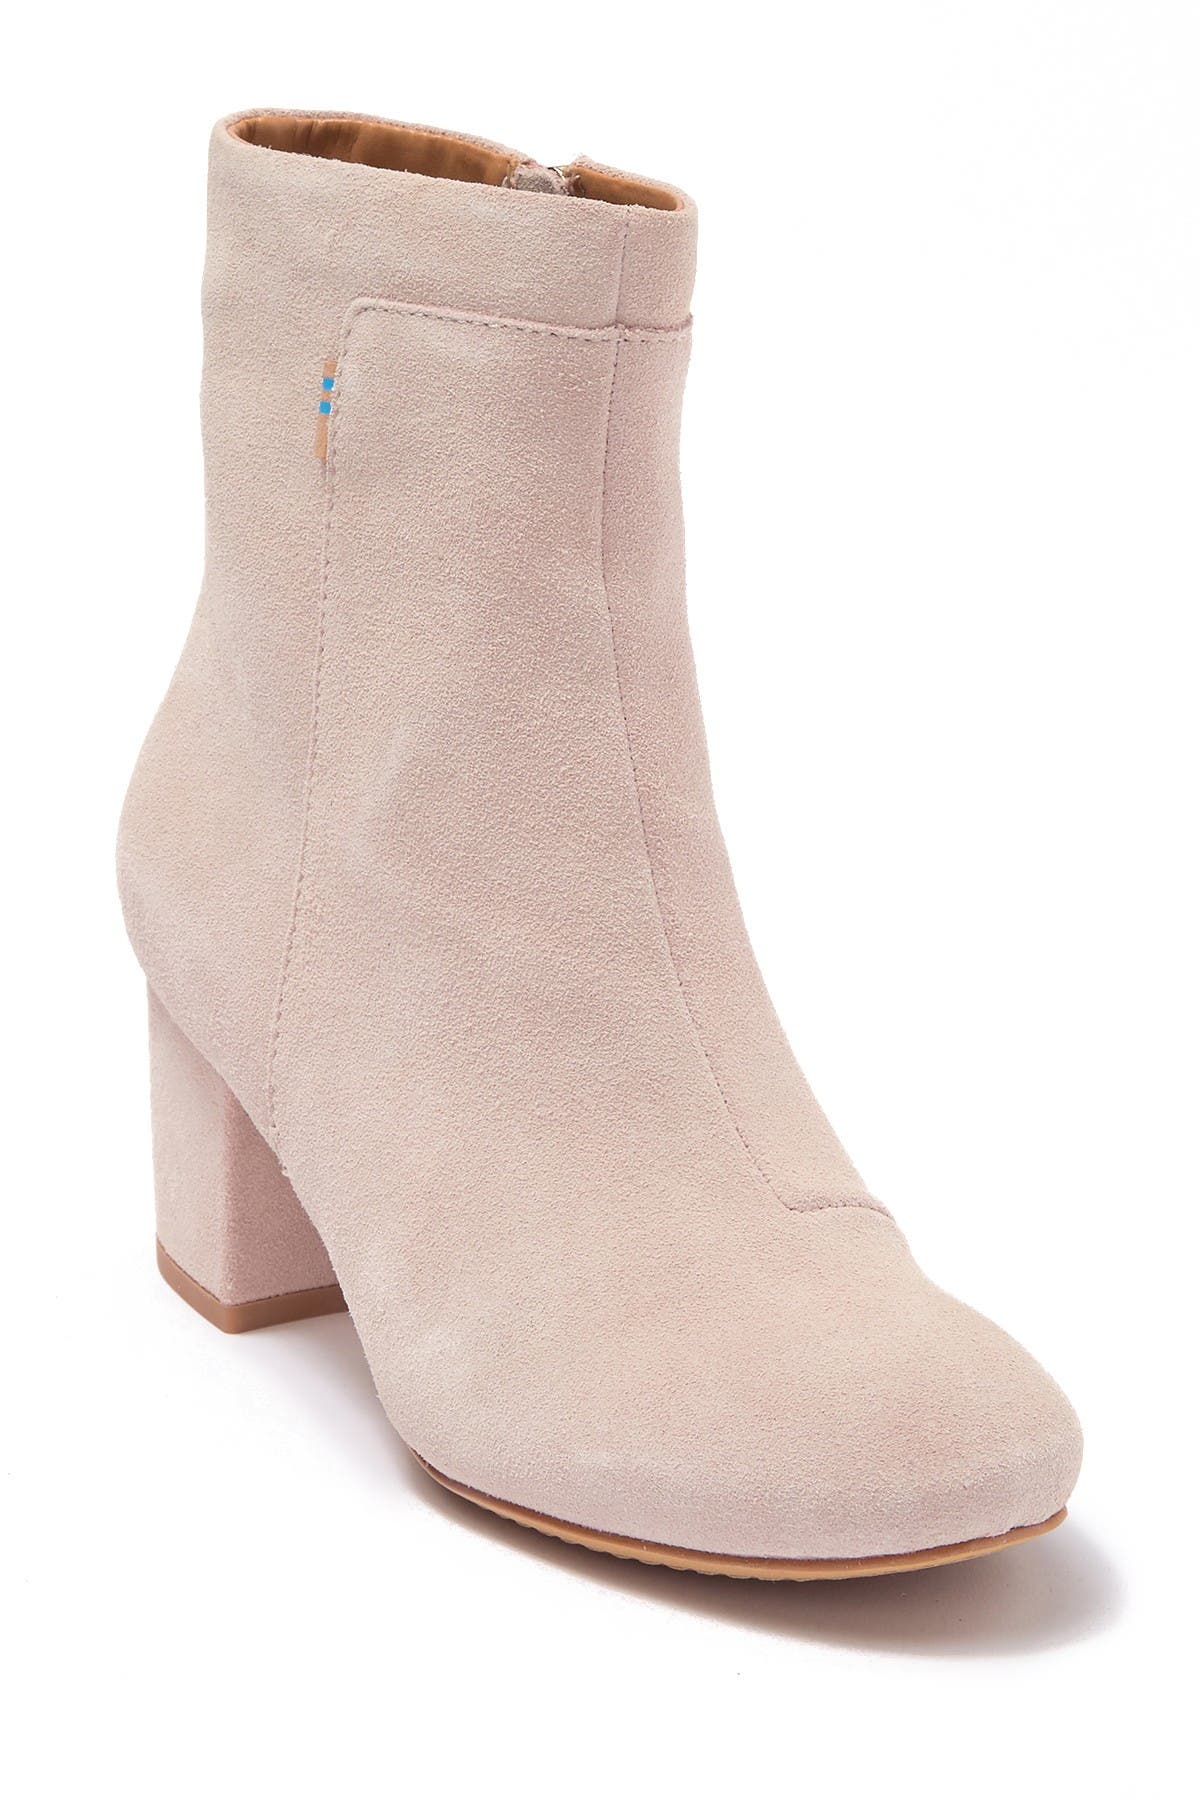 toms evie boots